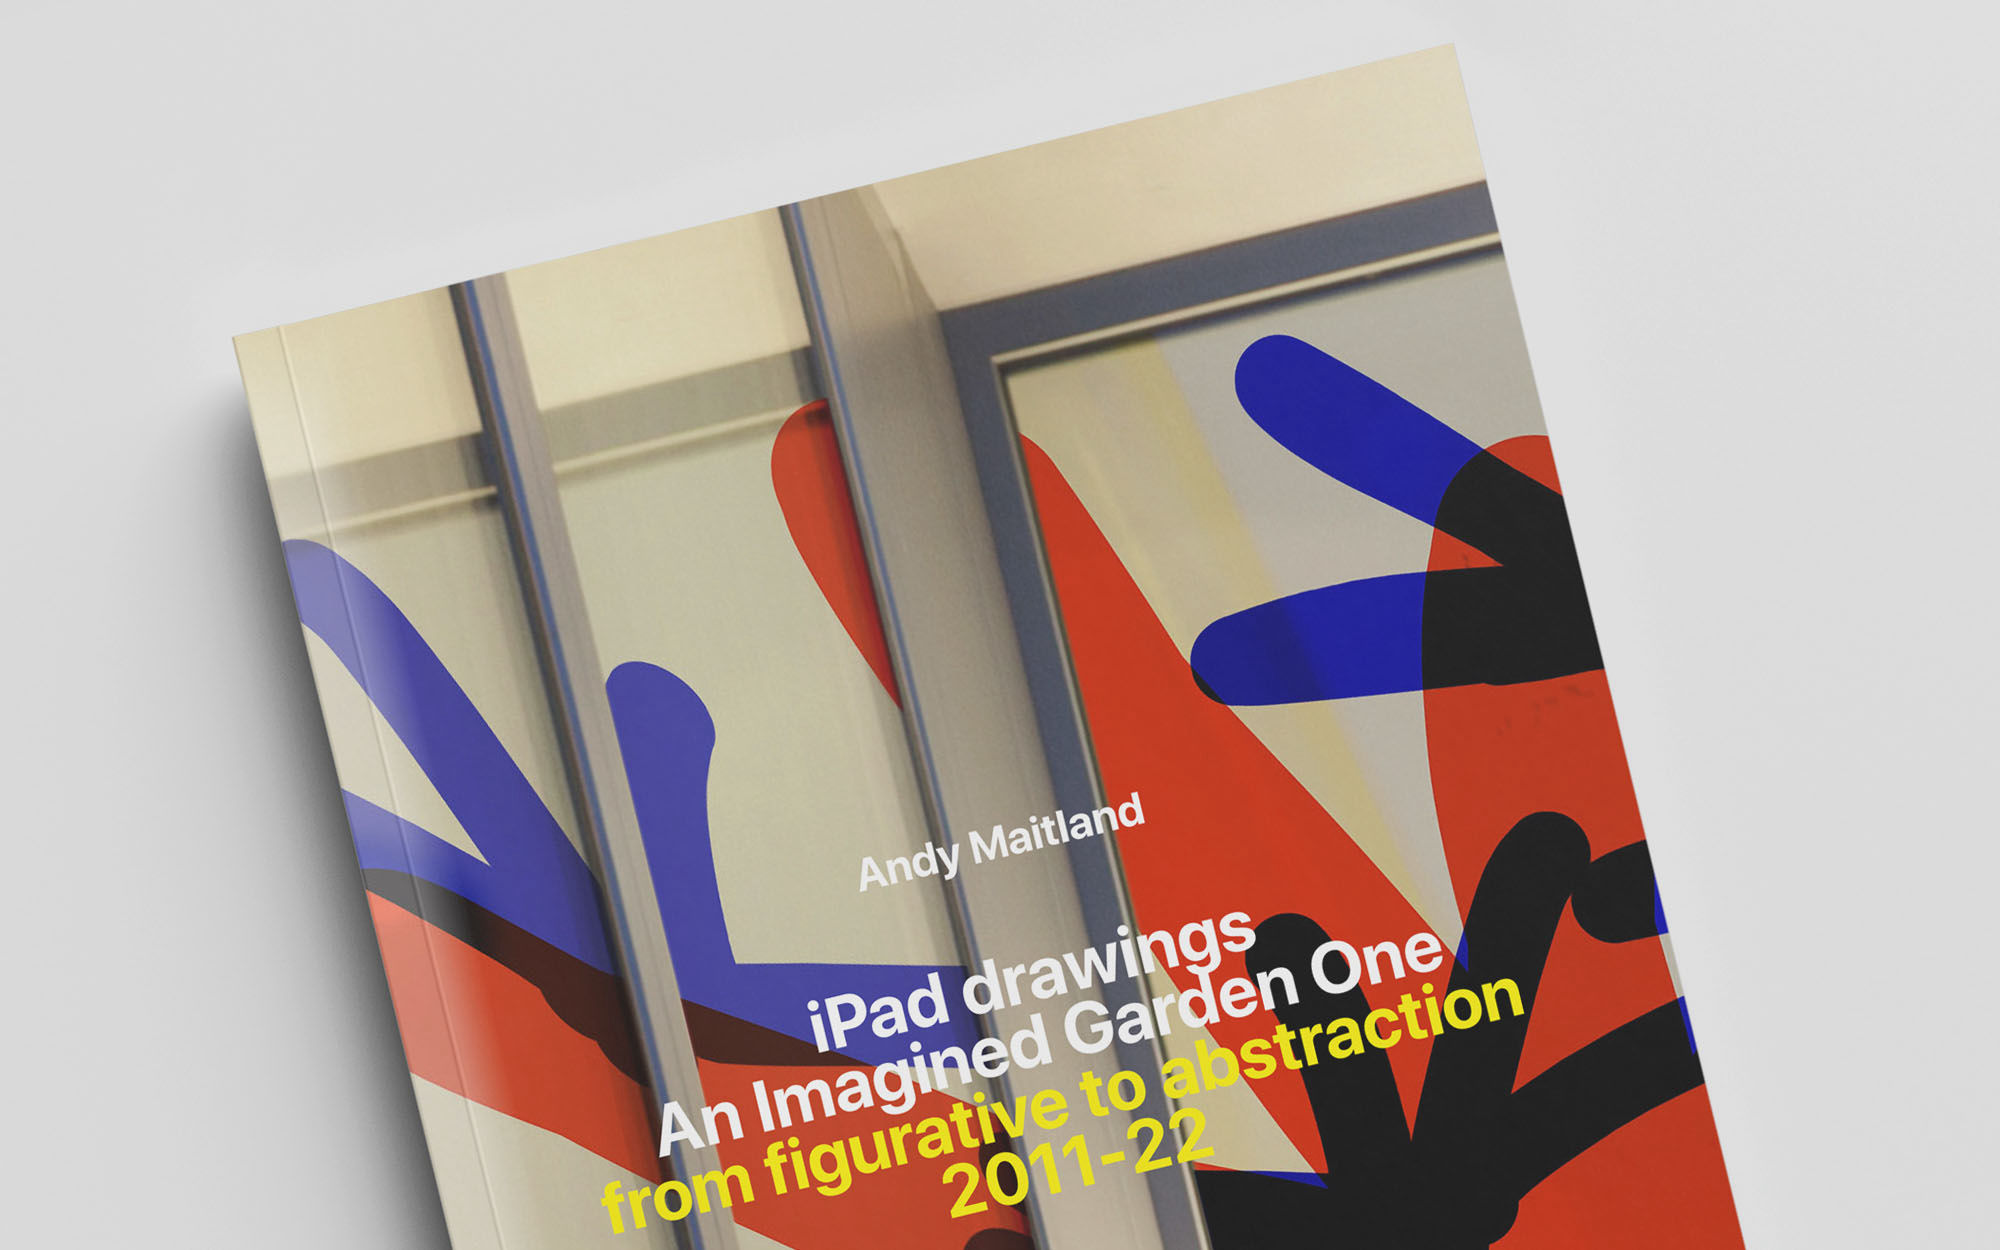 'Andy Maitland, iPad drawings, An Imagined Garden One, from figurative to abstraction 2011-22' new book